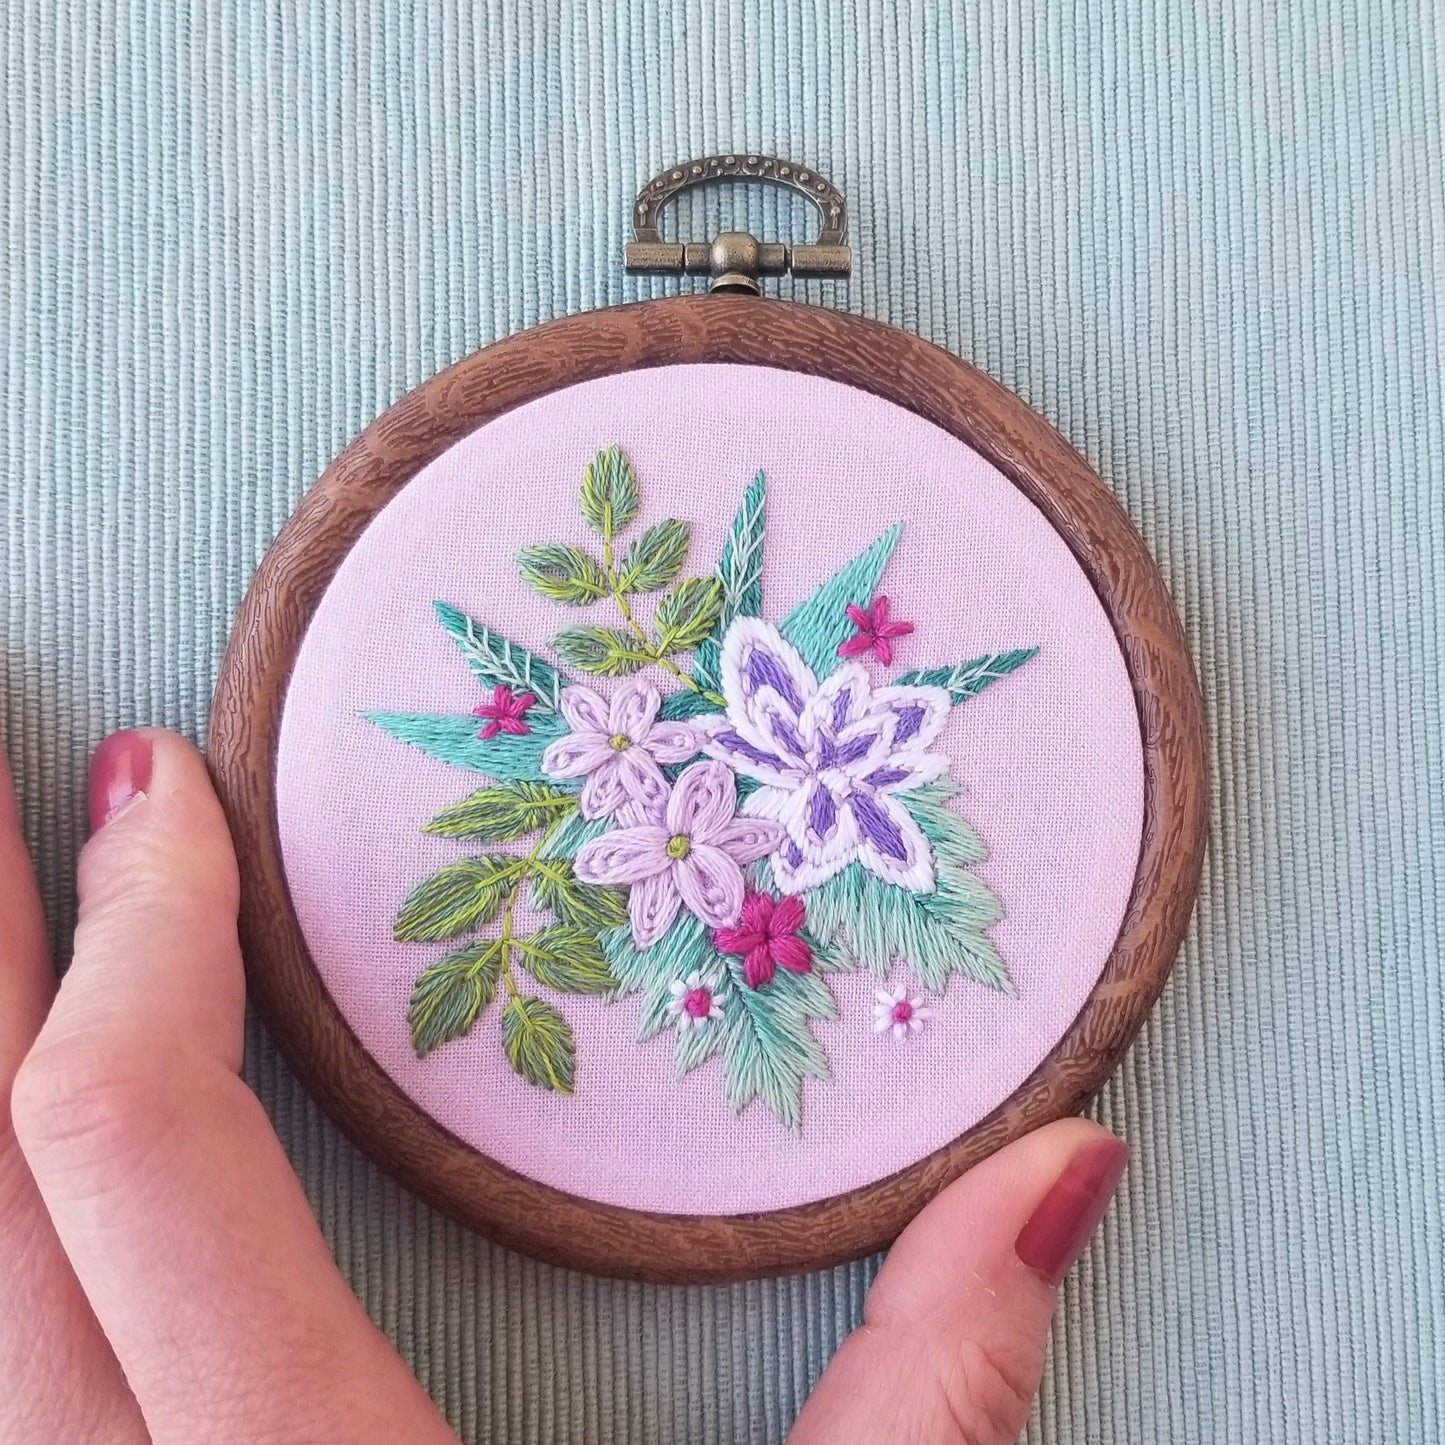 Tender Petals Embroidery Kit